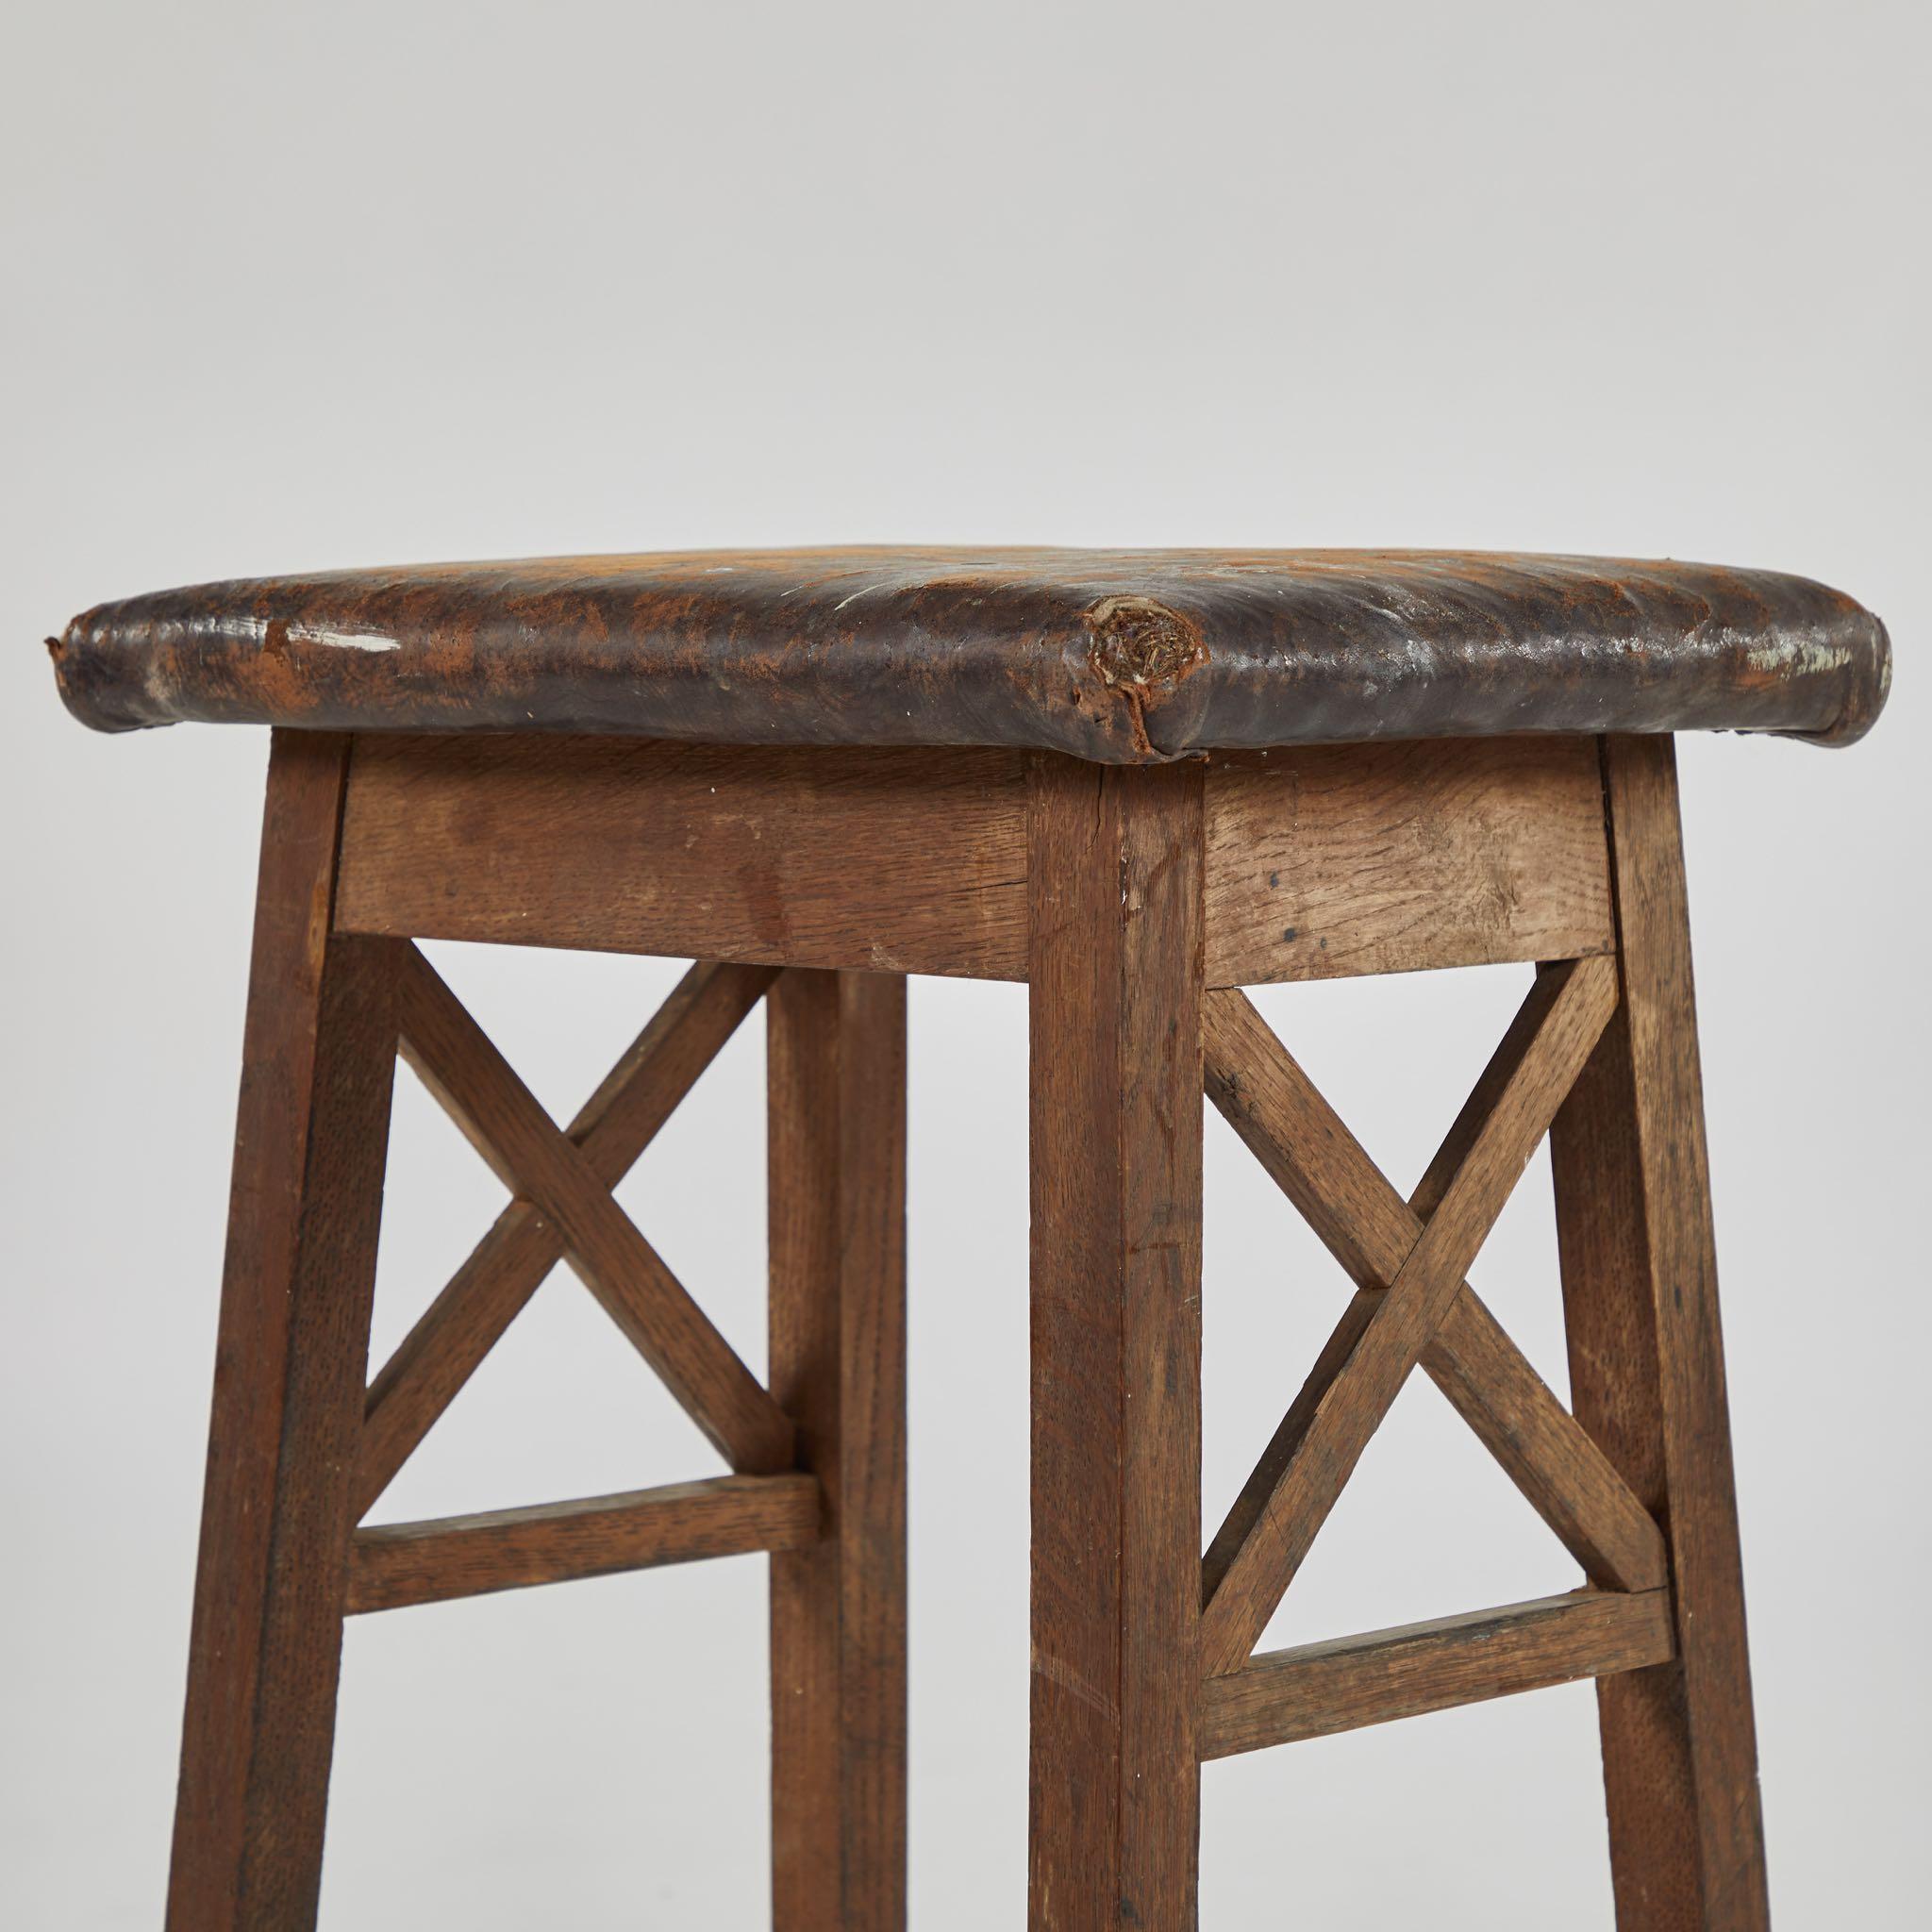 Early 20th-century English wood stool with square leather top, two X-shaped stretcher accents and a footrest on all sides. A rustic piece with great versatility. 

England, circa 1900

Dimensions: 18.5W x 14D x 30H